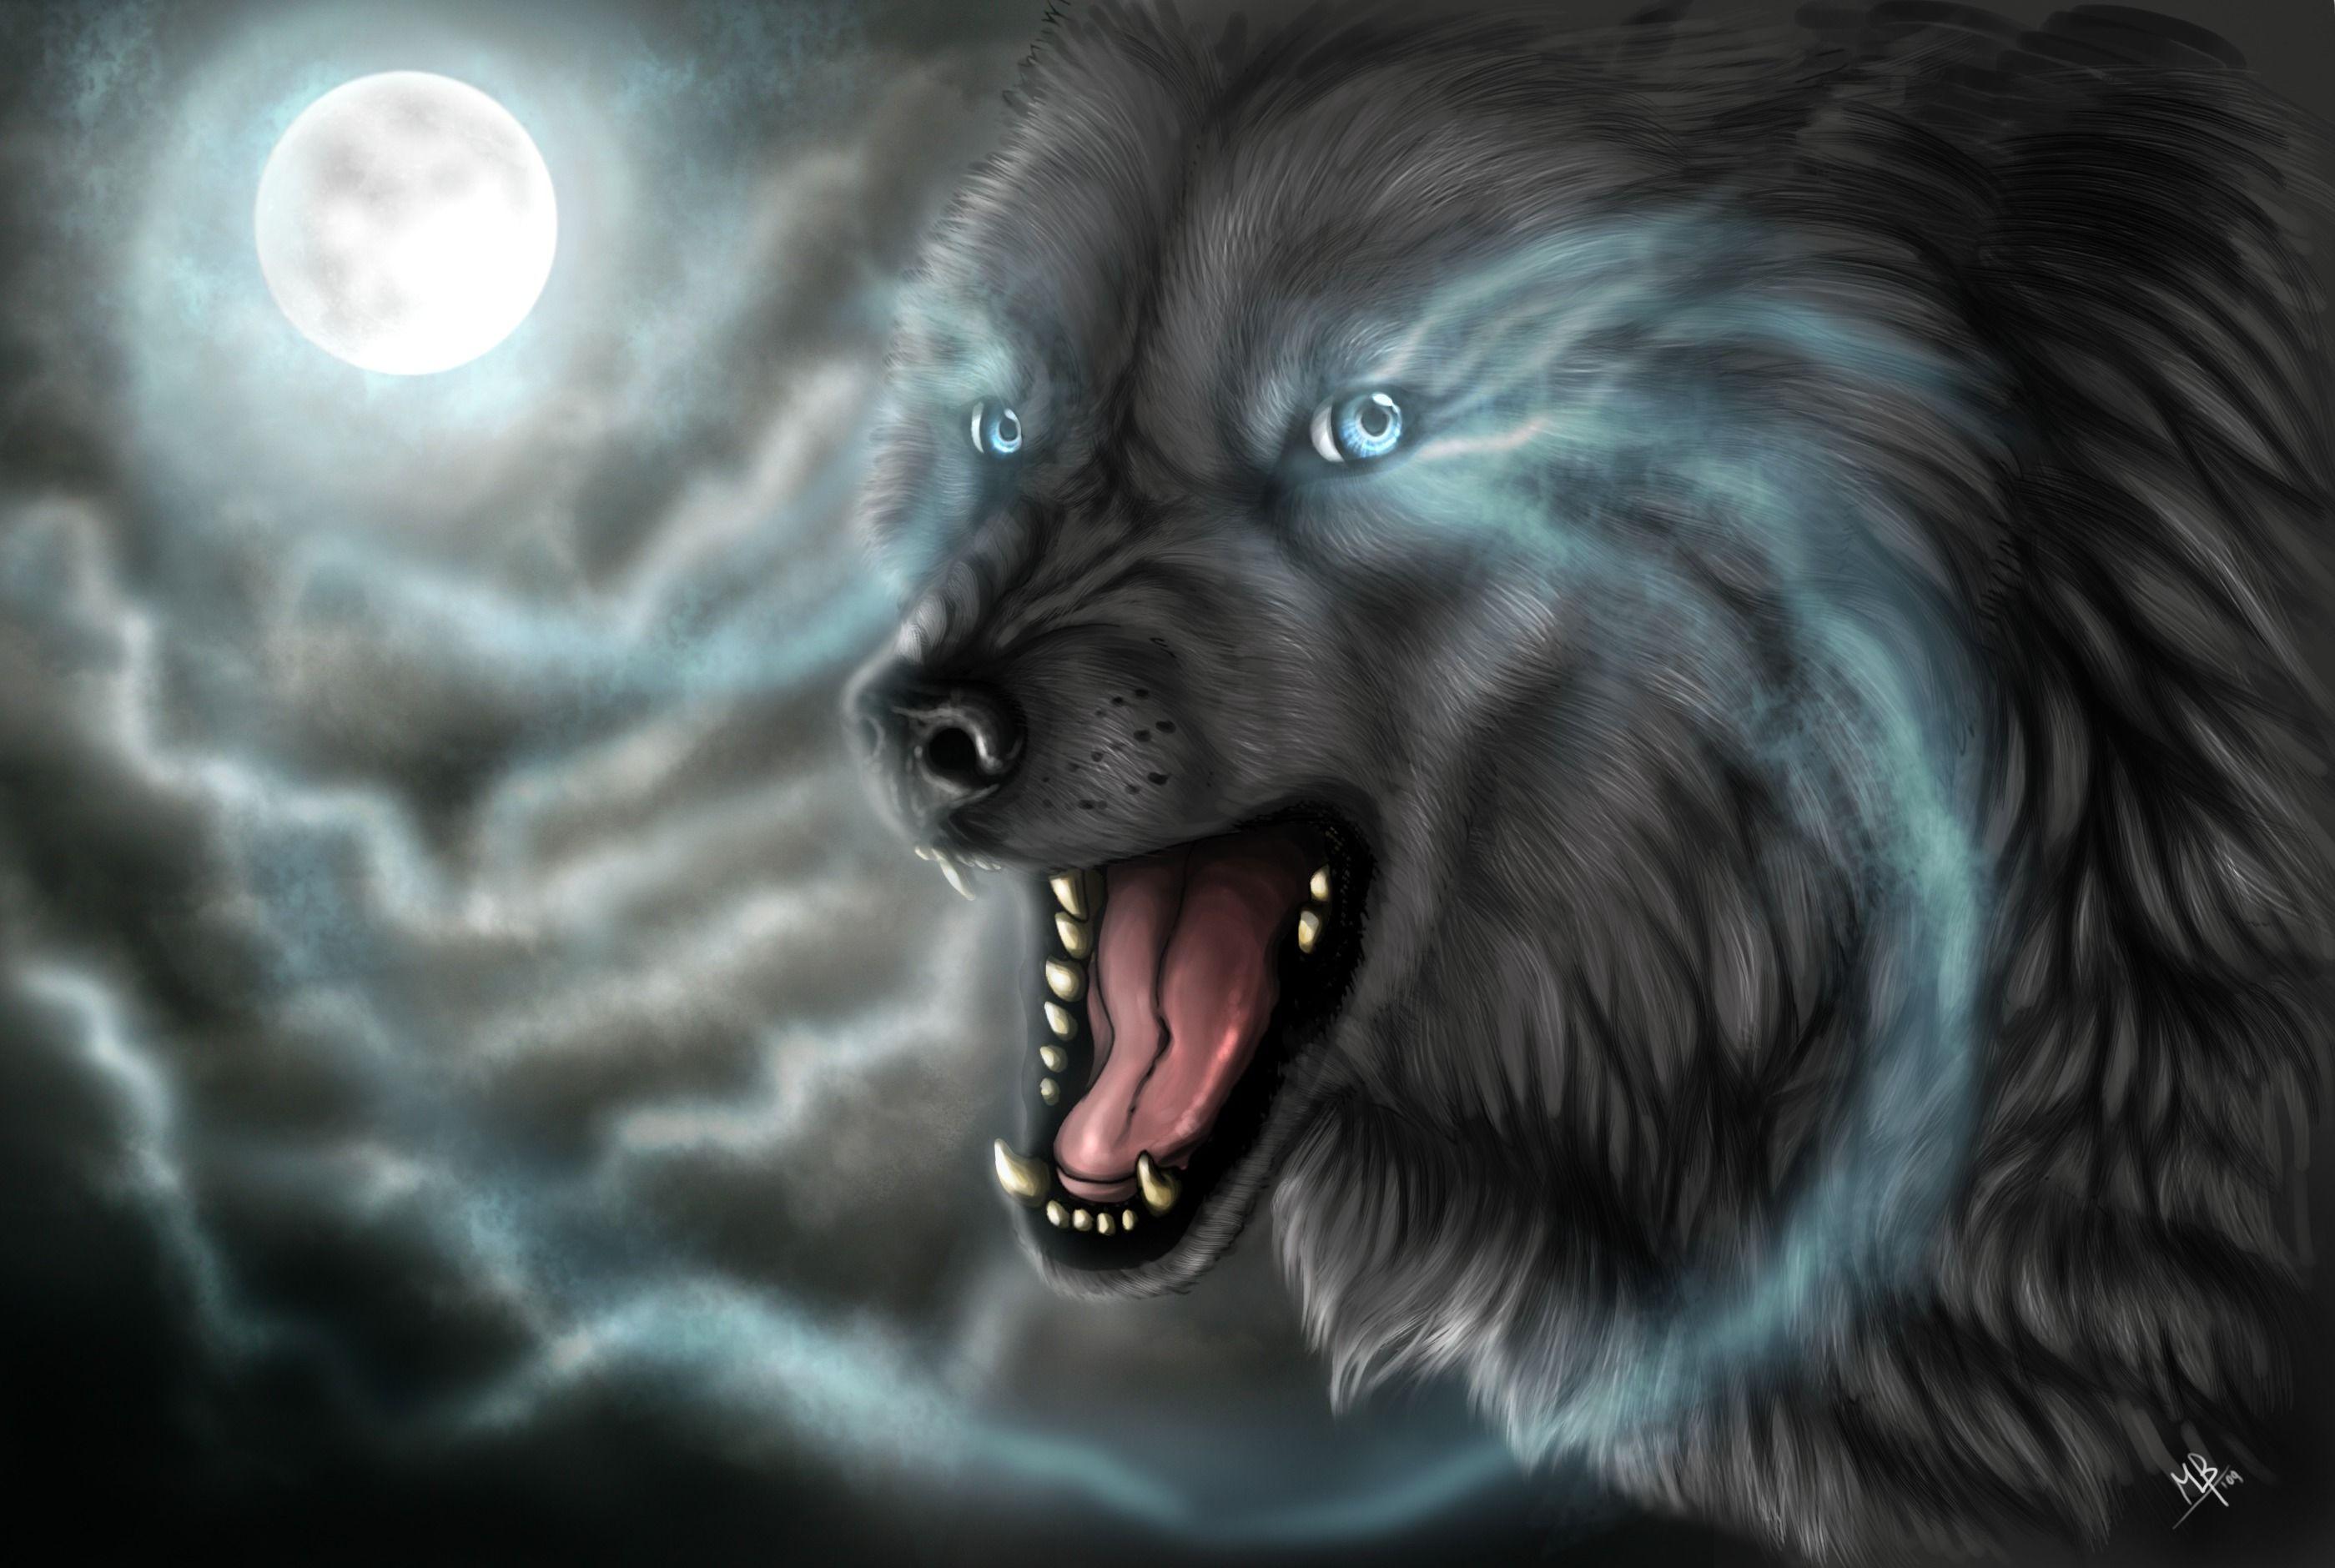 Moon and wolves Background for Desktop. download next wallpaper